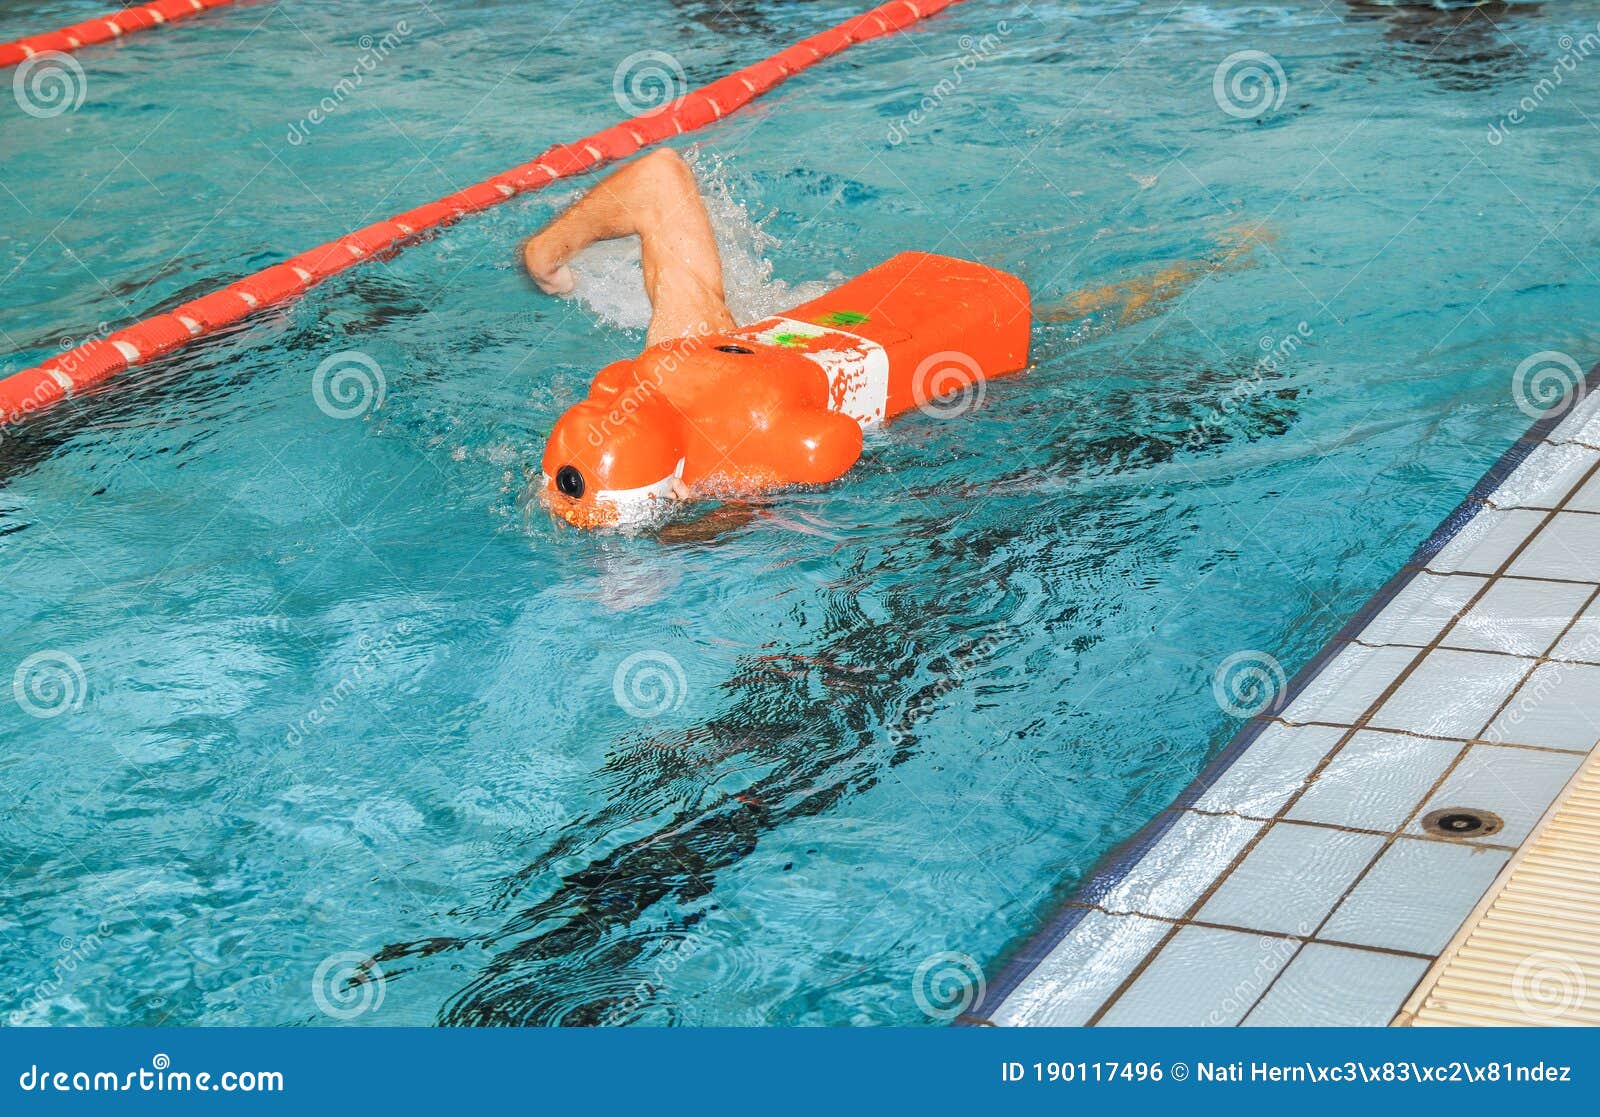 lifeguard training with rescue dummy in a pool